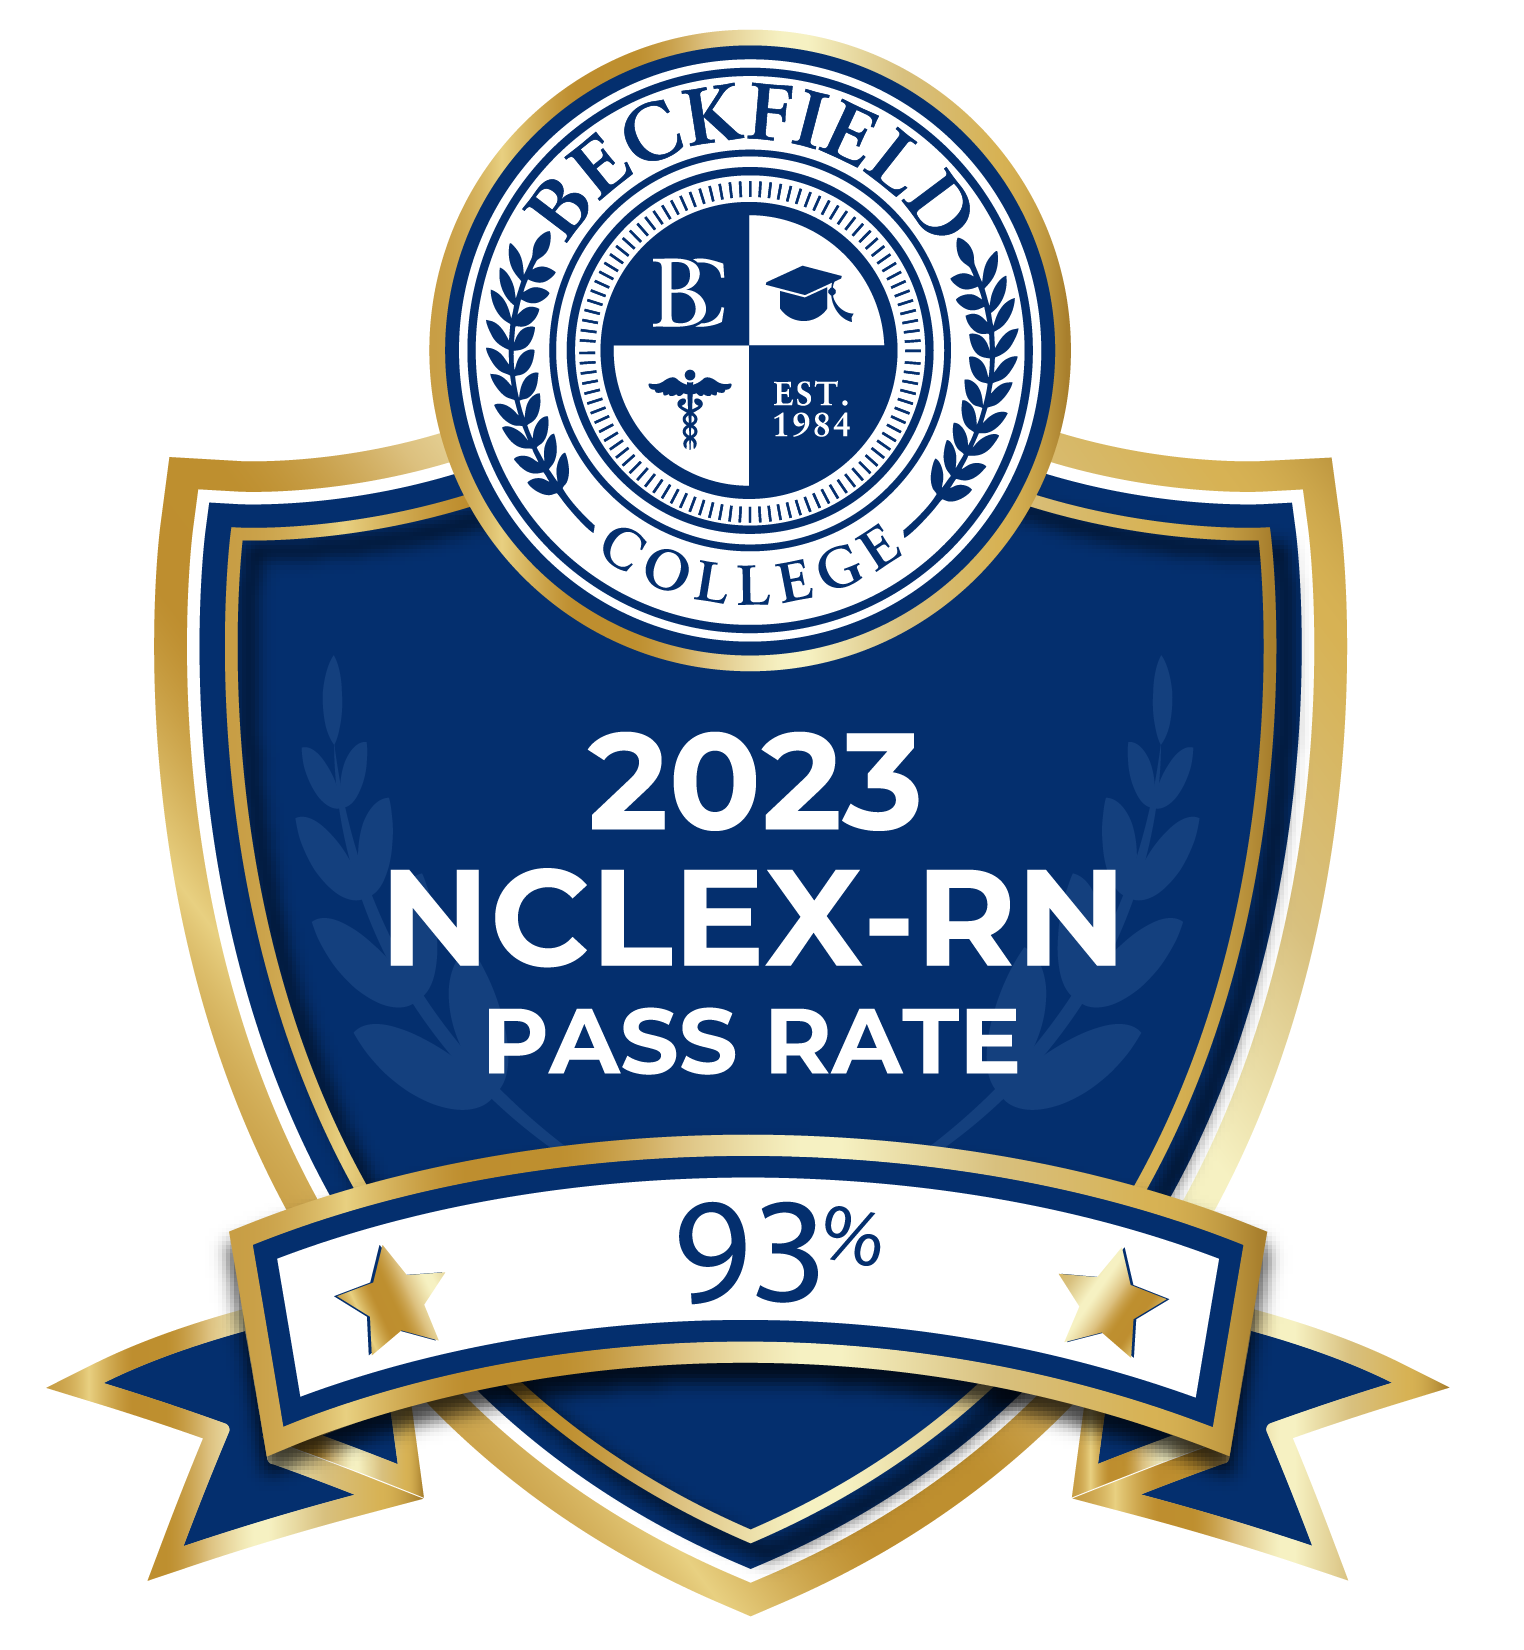 2023 NXLEX-RN passing rate badge for ADN program at Beckfield College.